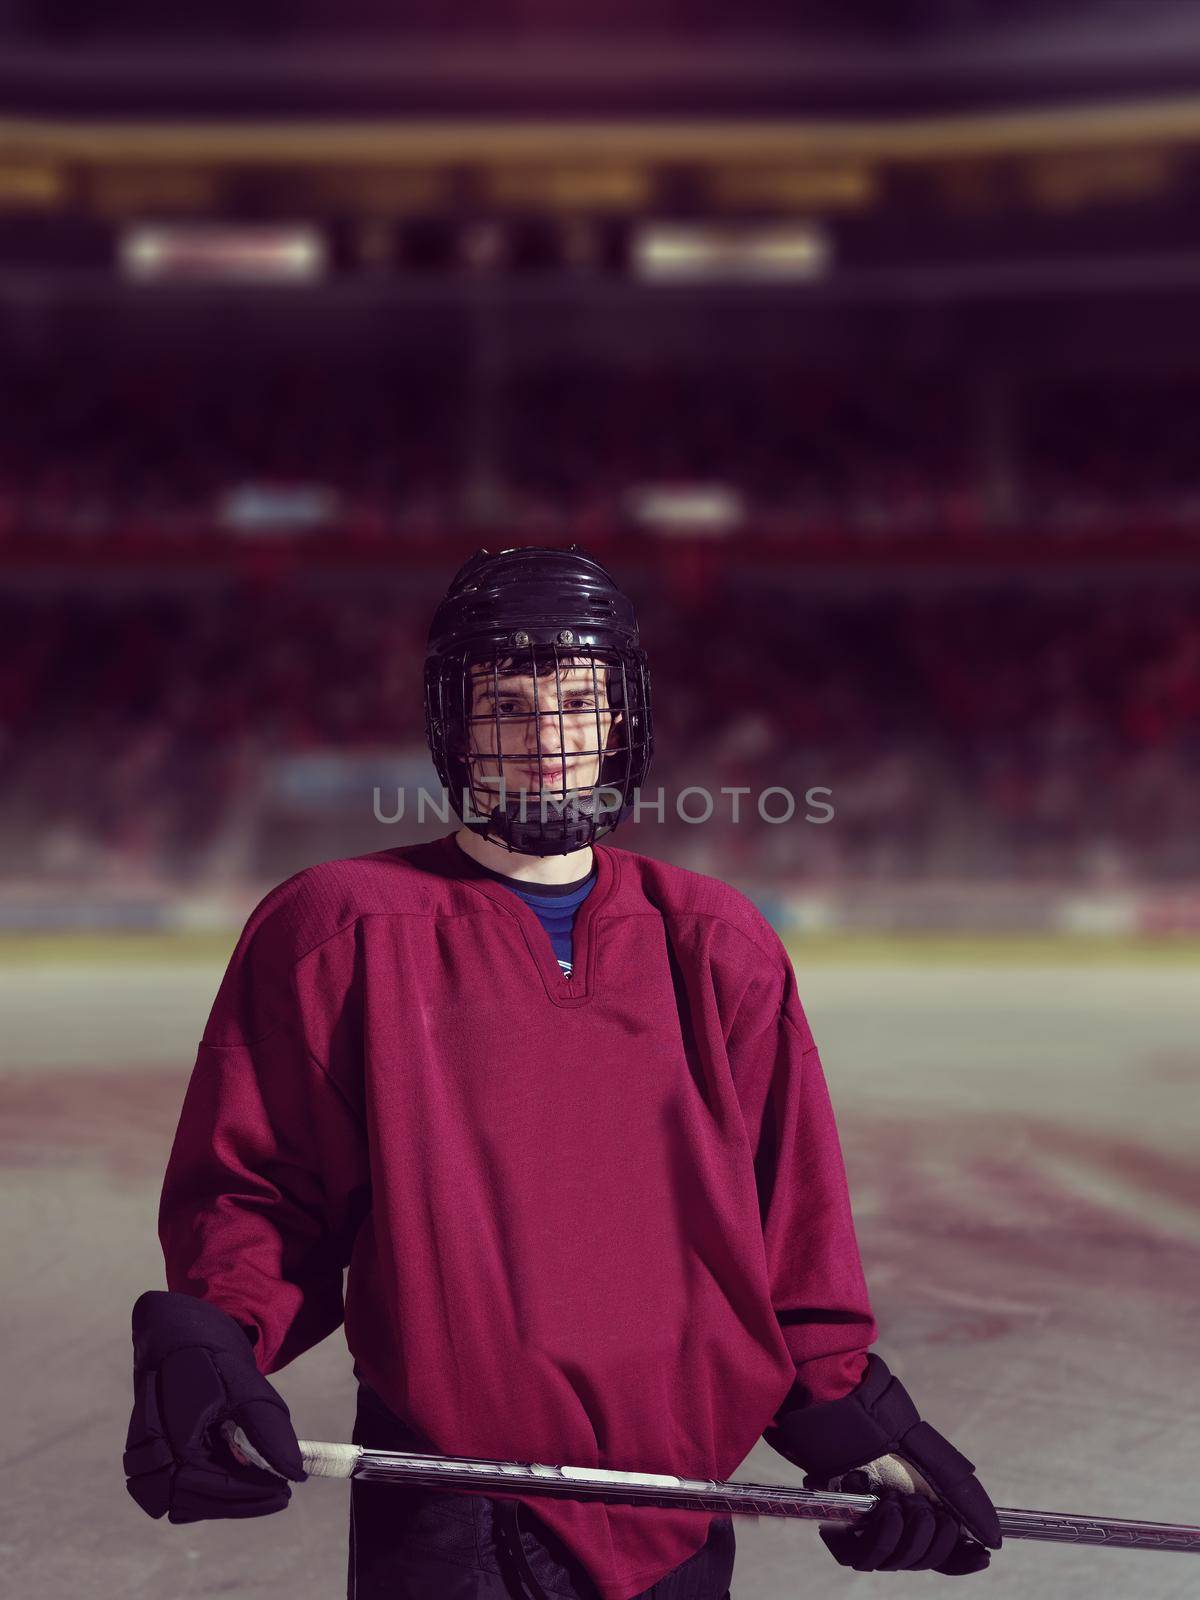 young ice hockey player portrait on a match